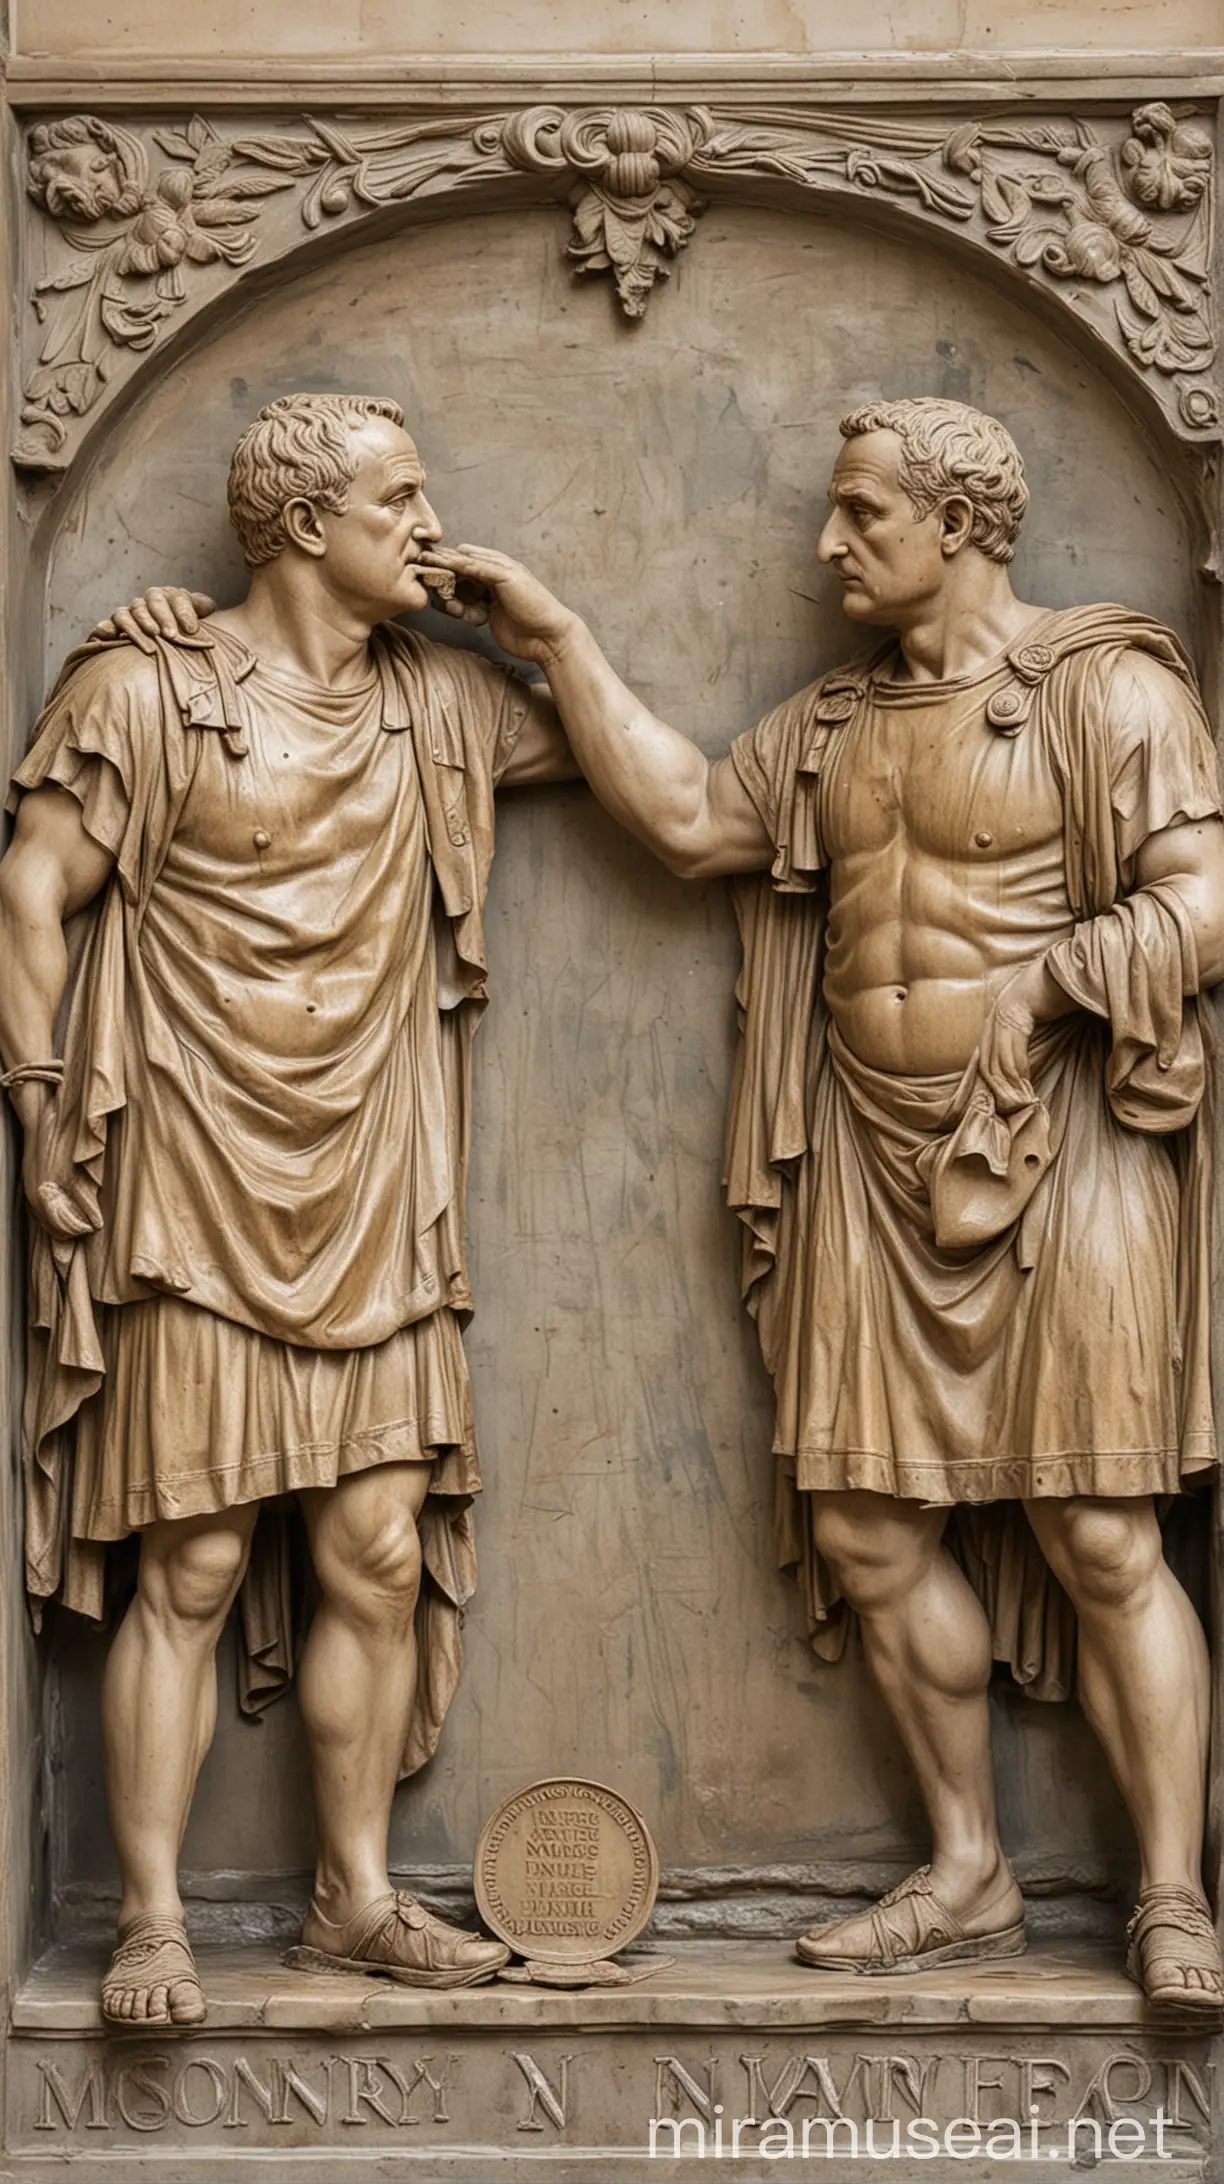 Show the confrontation between Vespasian and his son over the public urinal tax, ending with Vespasian holding a coin to his son's nose with the quote, "Money does not smell." hyper realistic